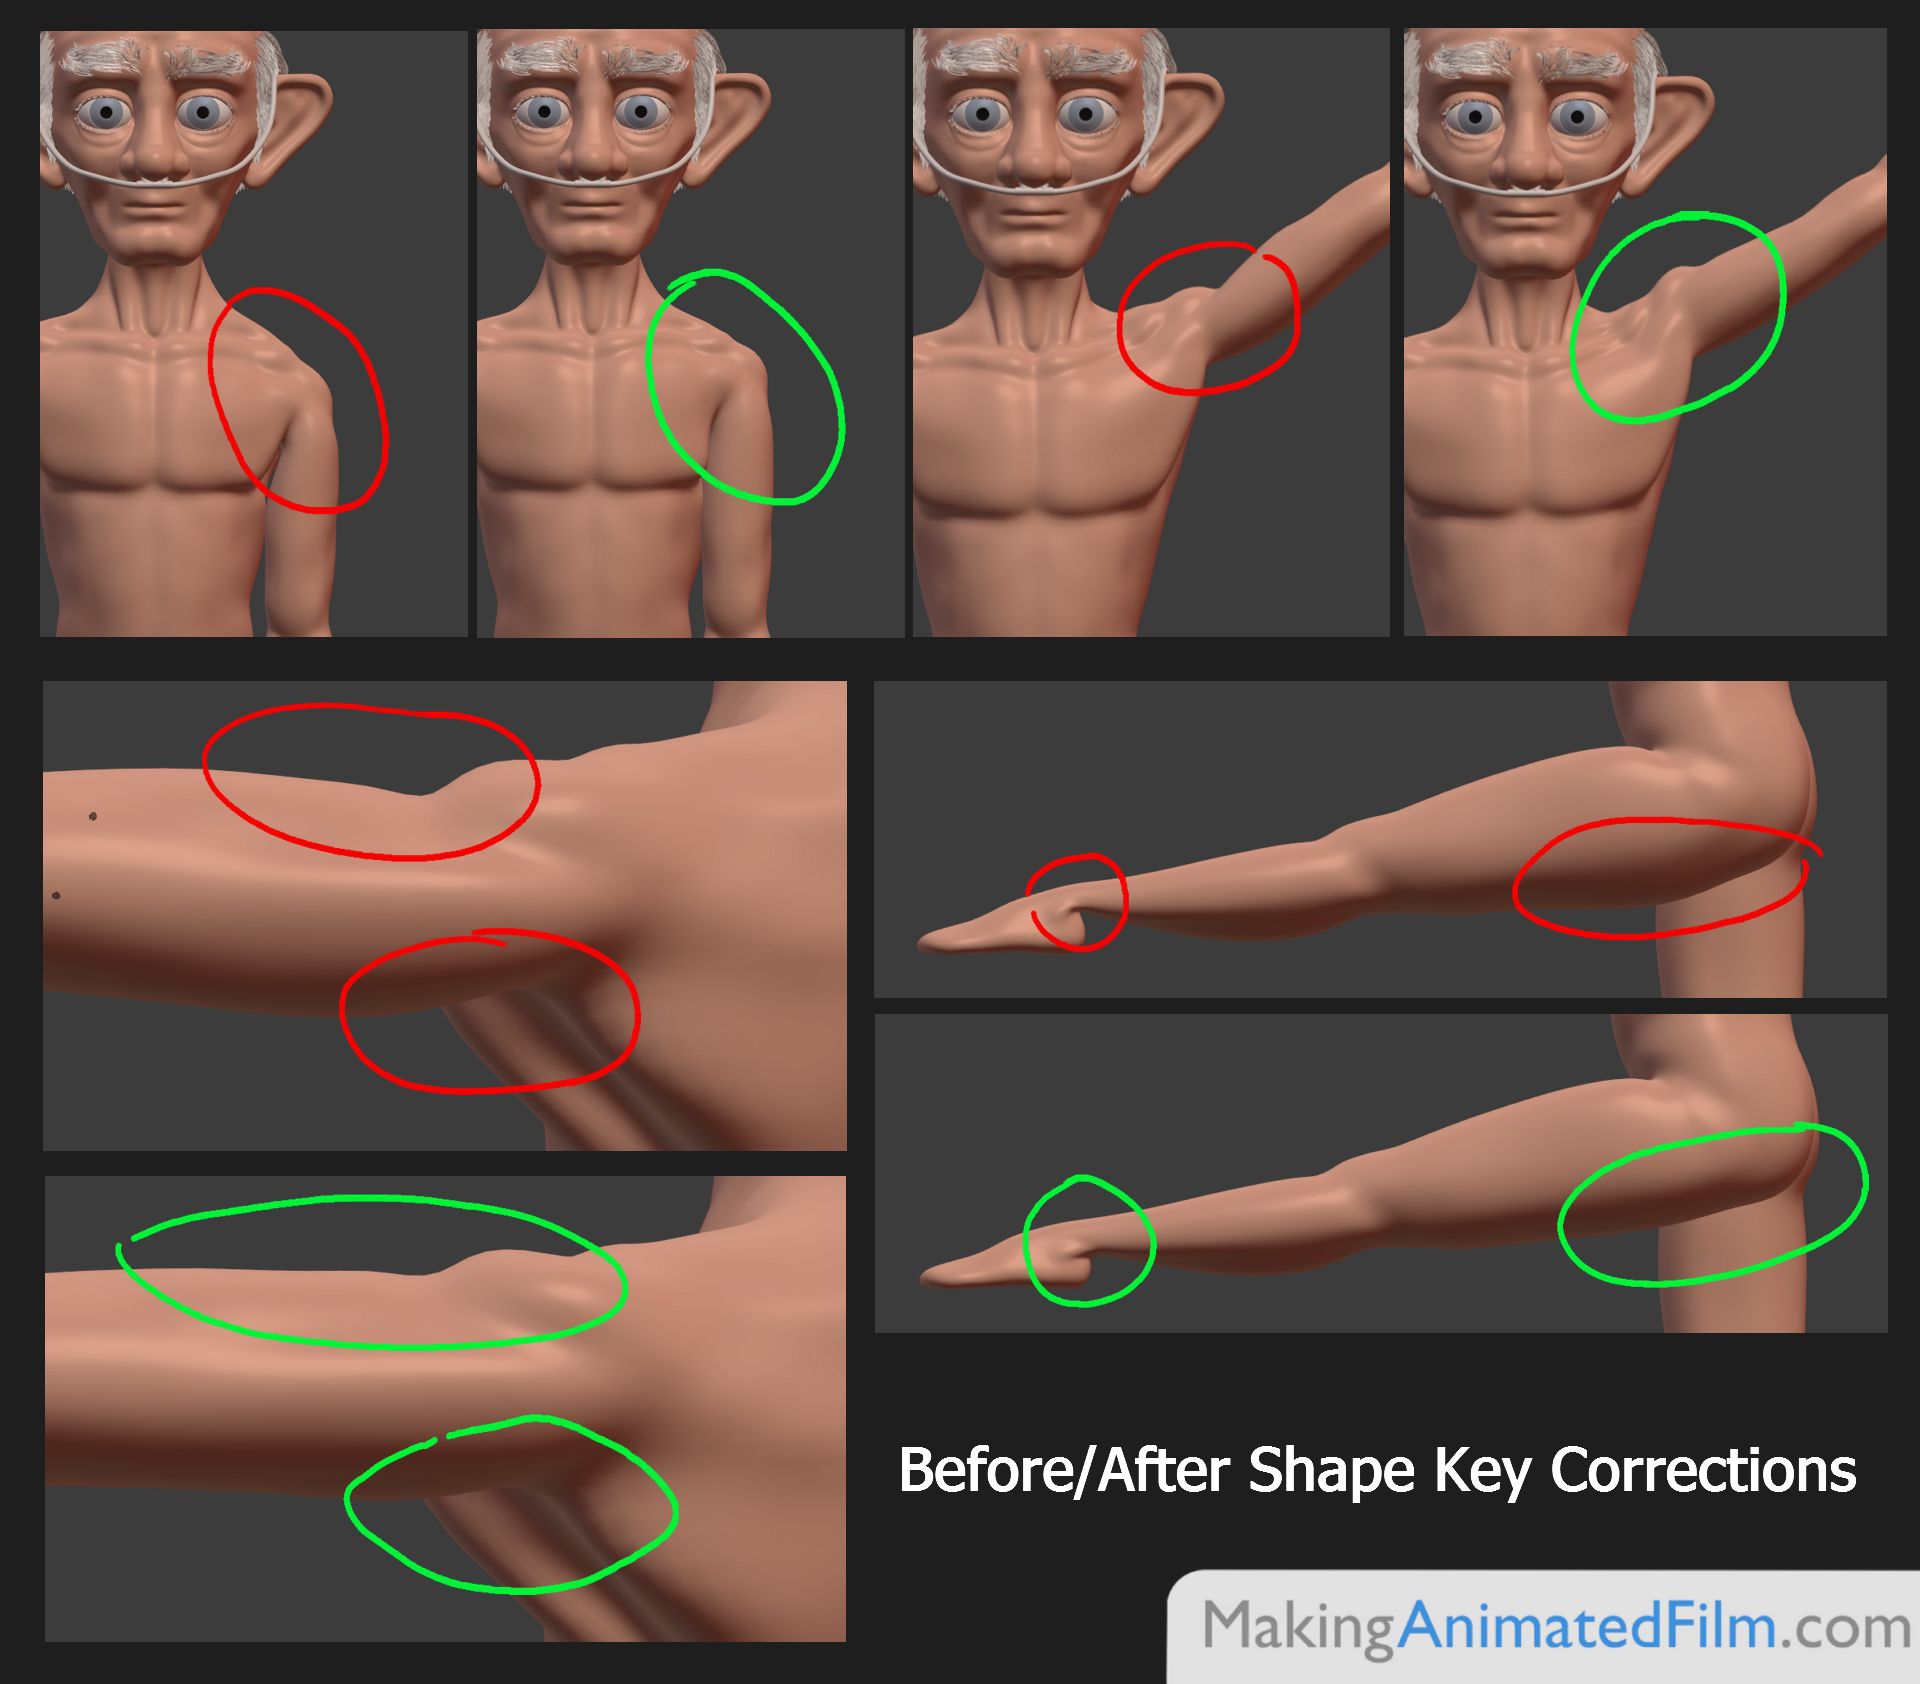  Raw mesh deformation versus with shape key fixes applied